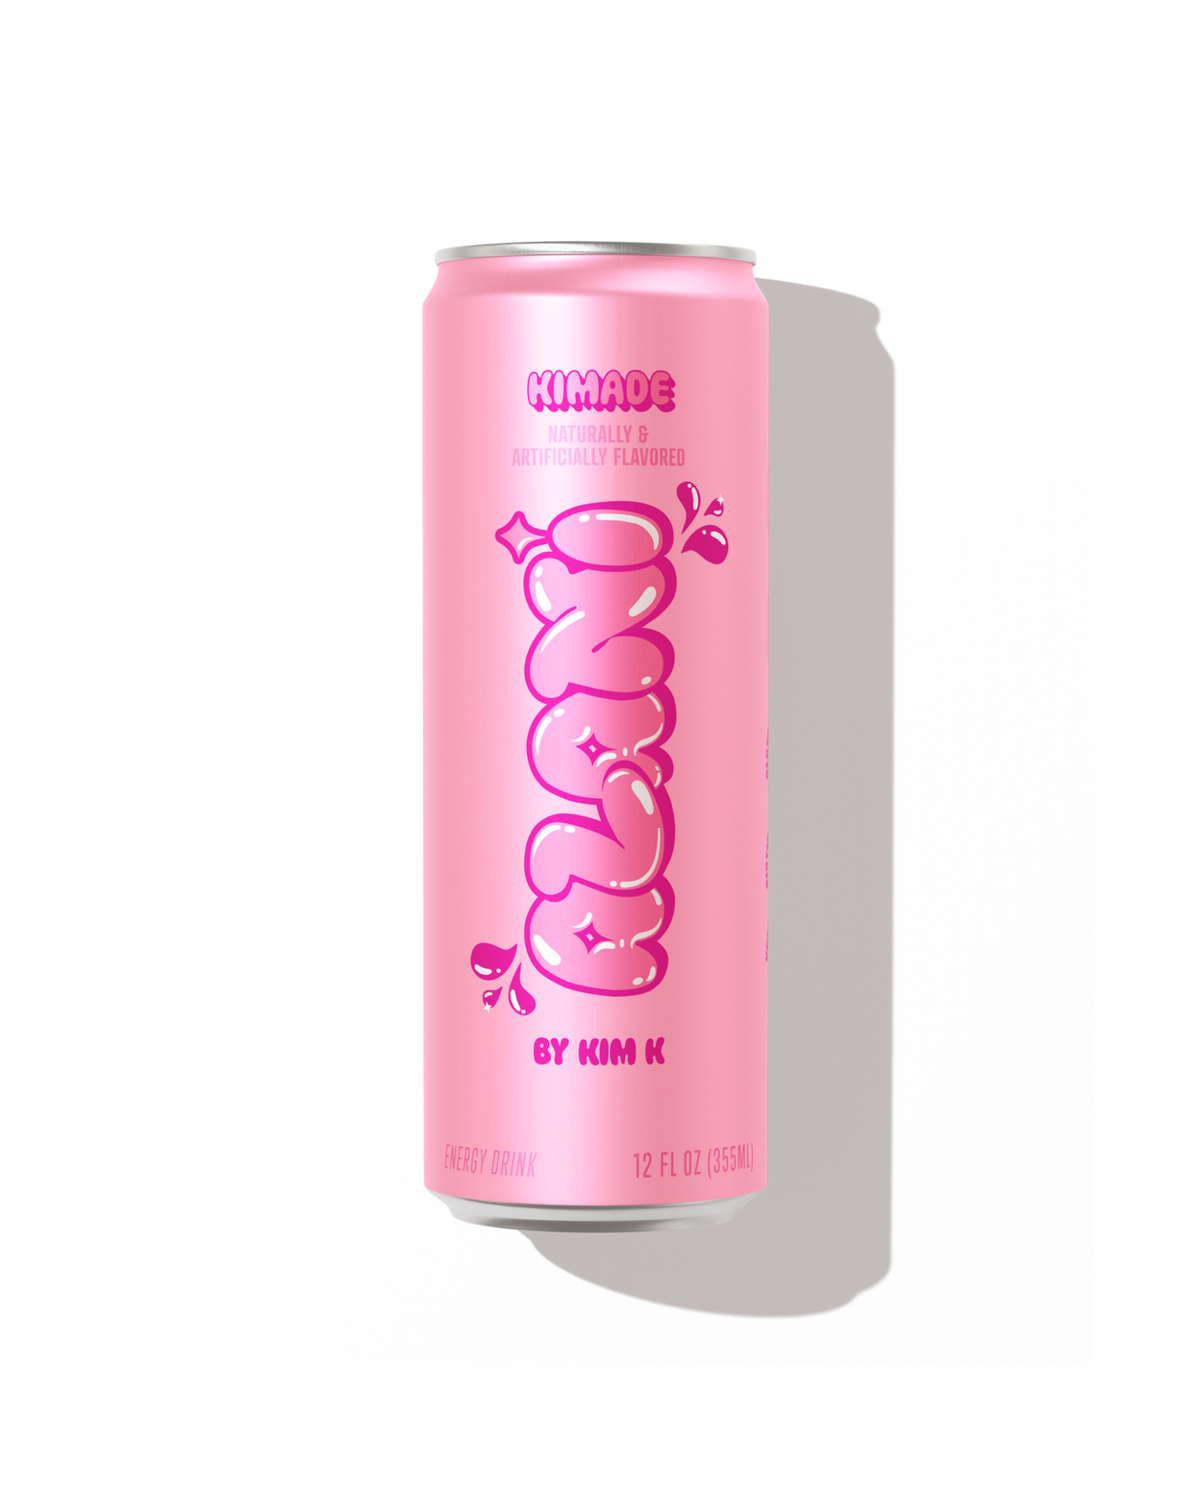 A can of Energy Drink - Kimade. 